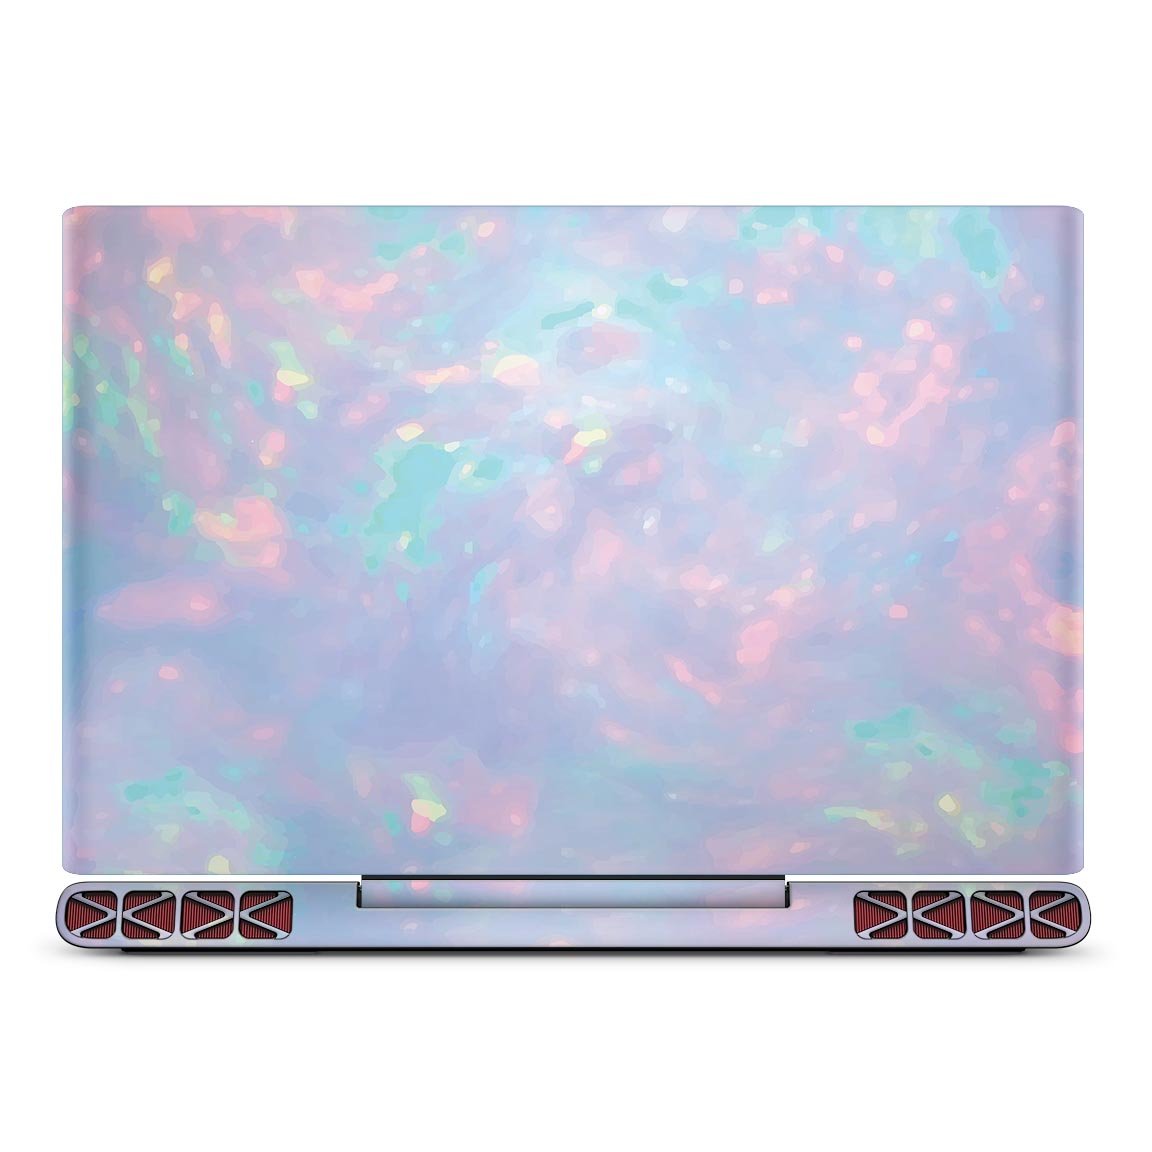 Blurry Opal Gemstone - Full Body Skin Decal Wrap Kit for the Dell